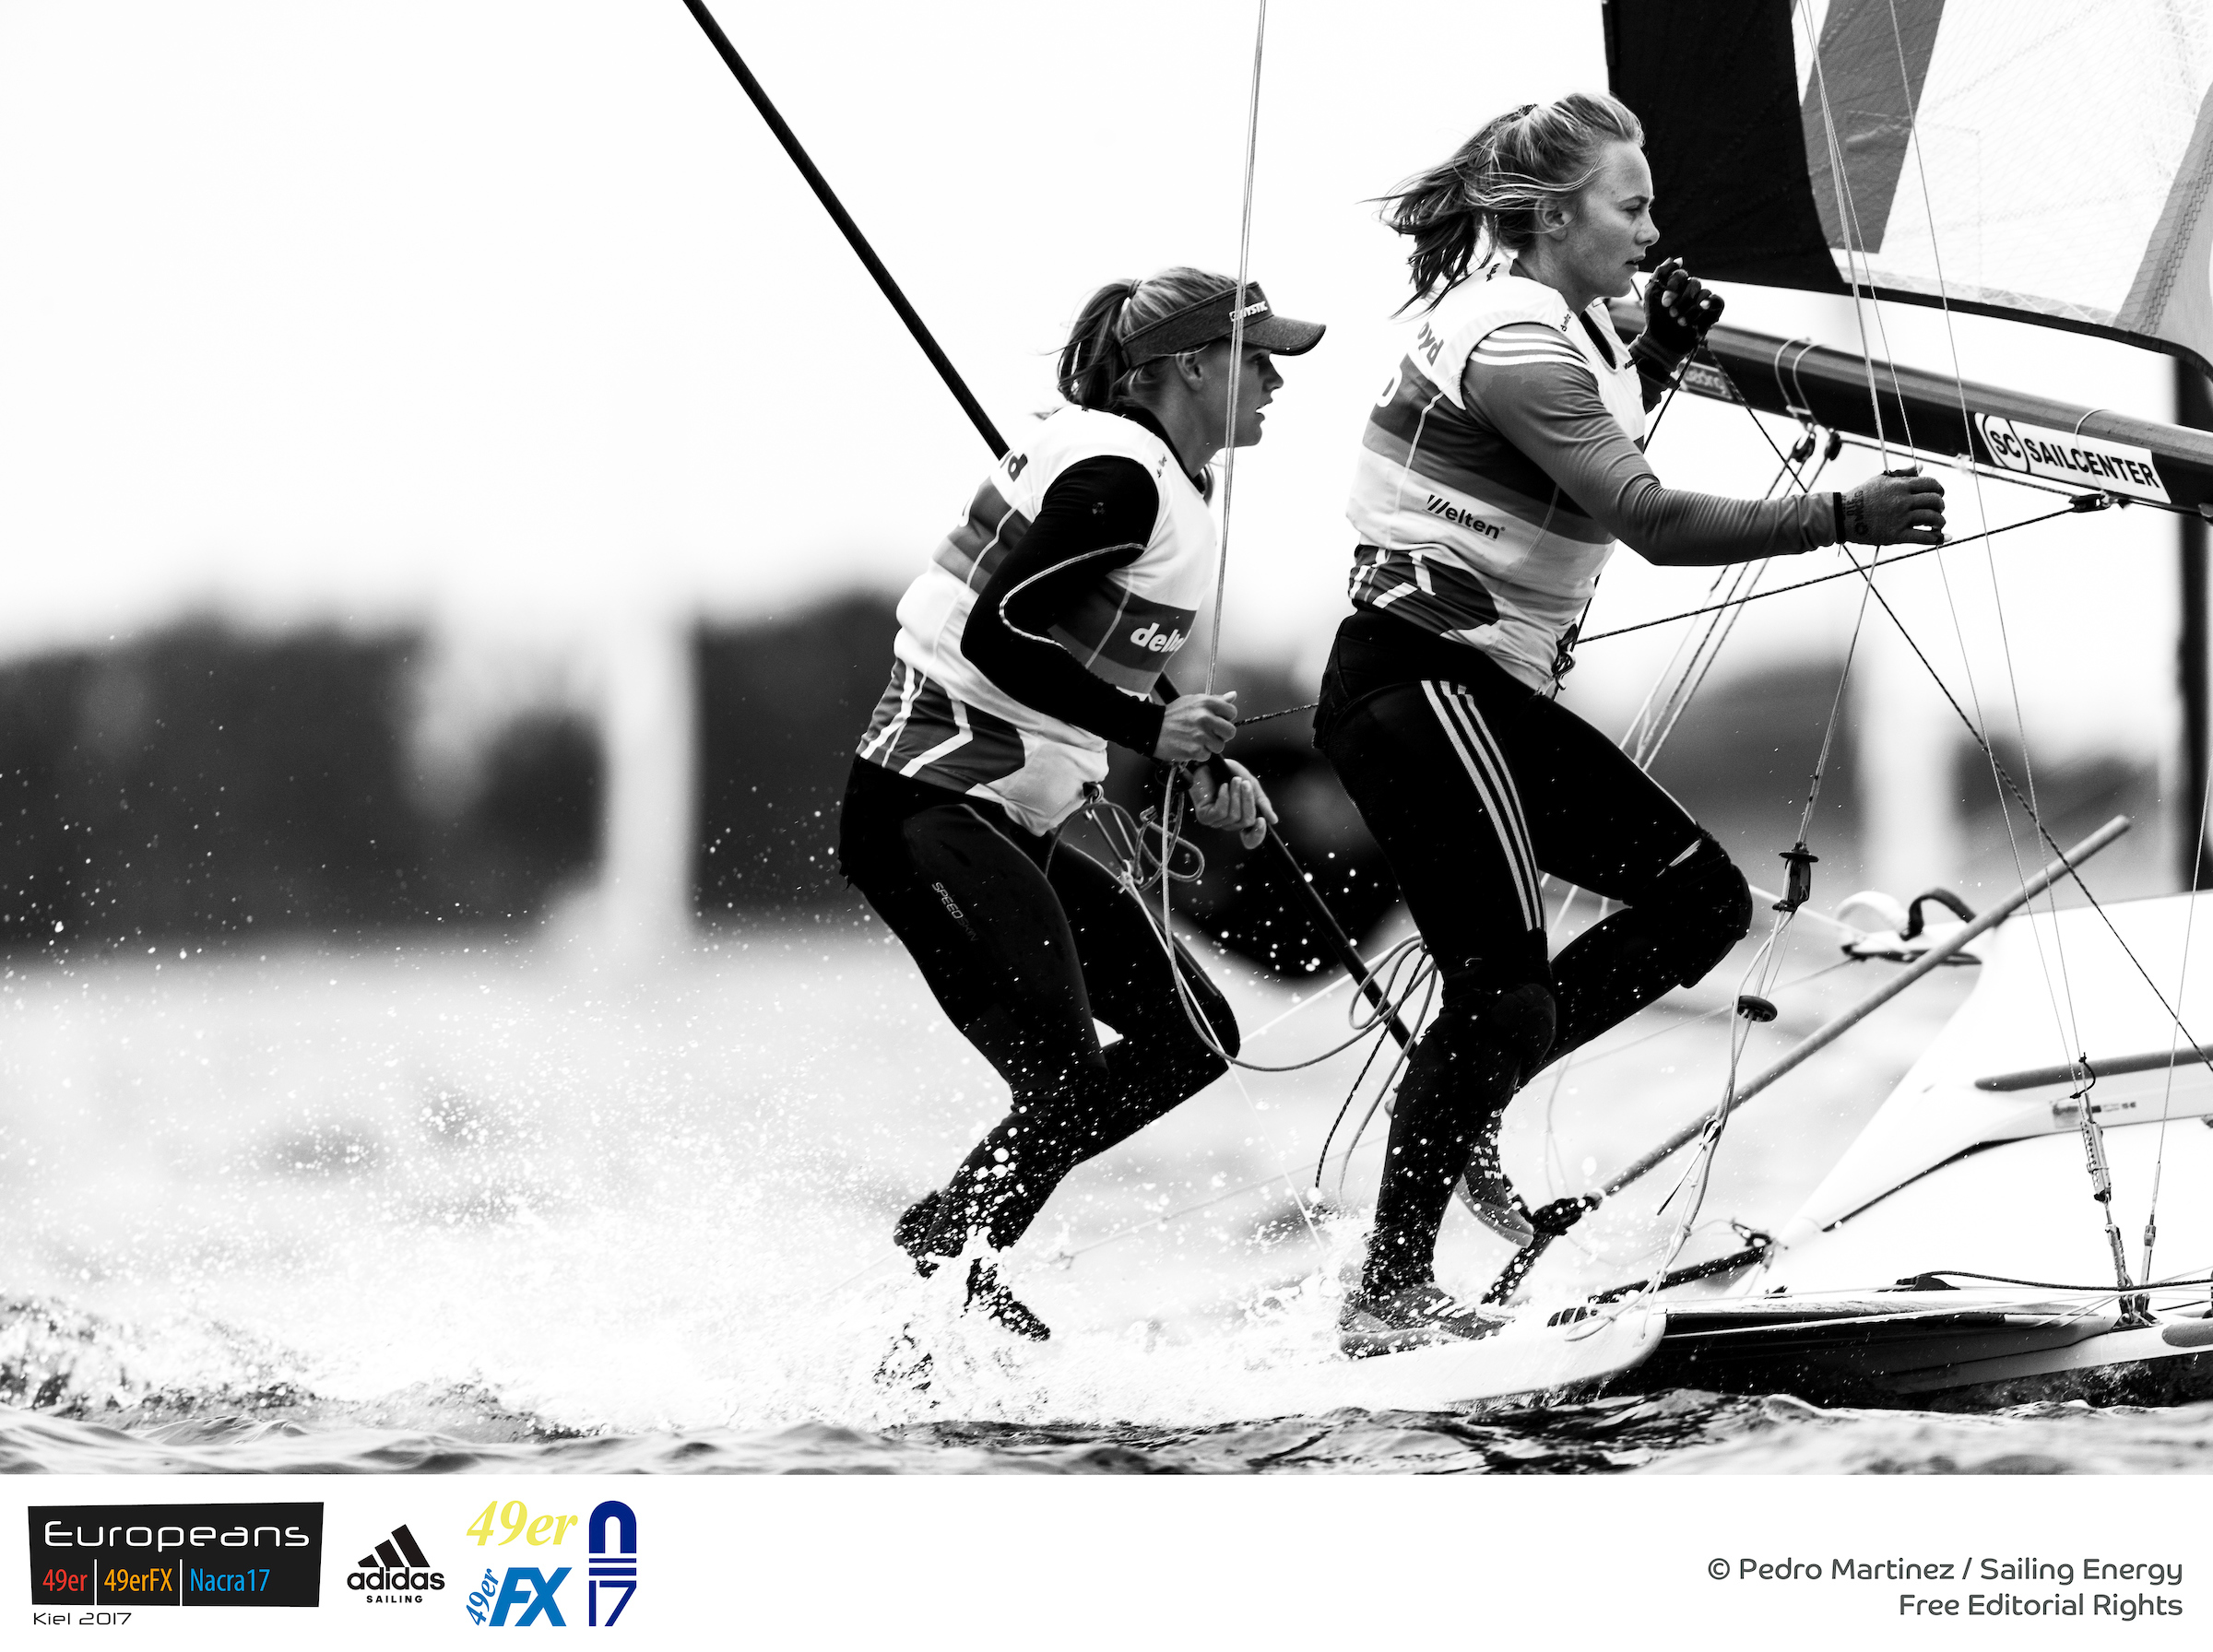 Locals Surge Ahead As Finals Begin, Finnish Foiling Heroics On Day 4 of European Championship